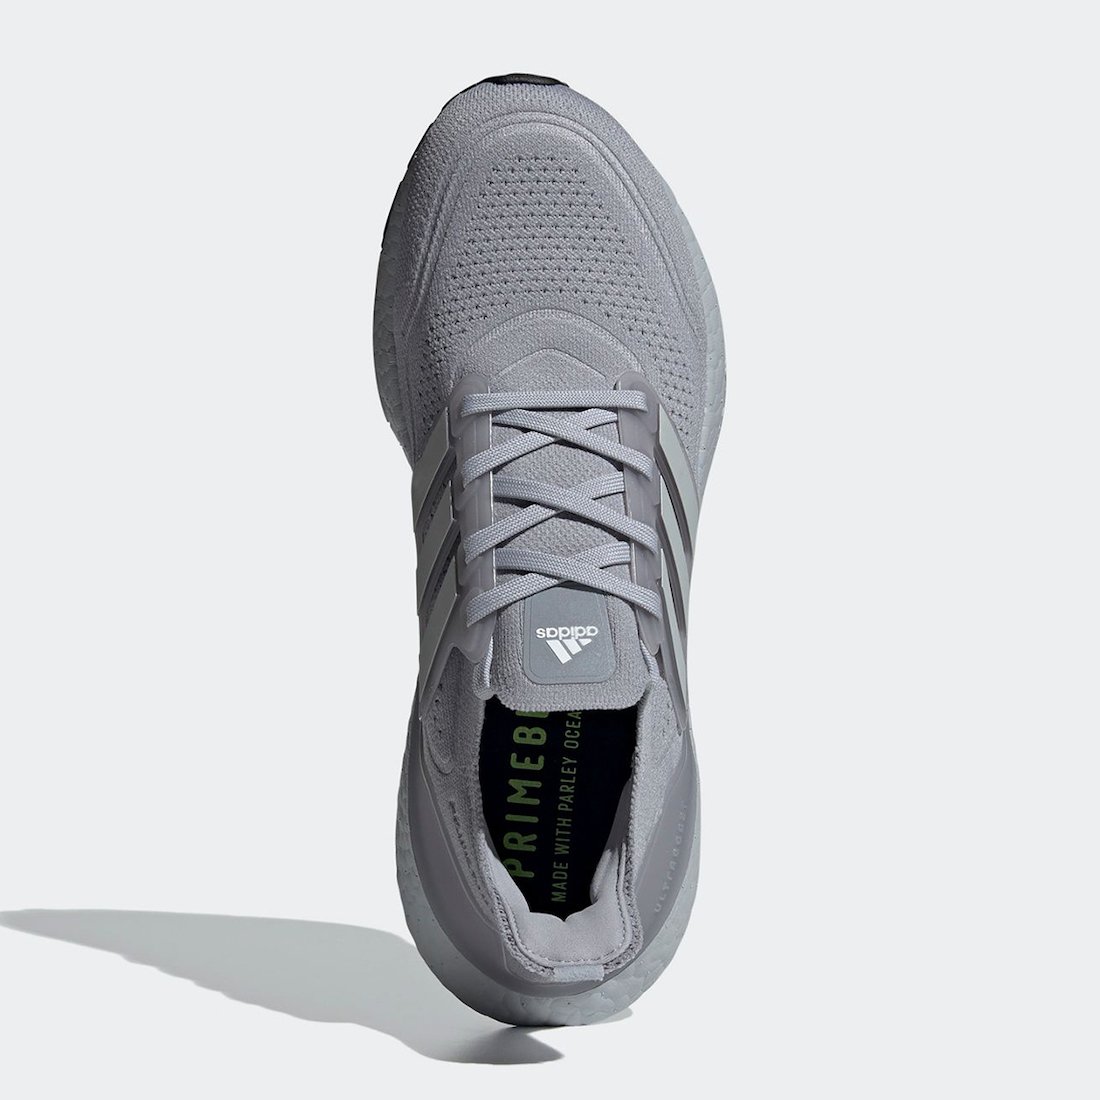 adidas Ultra Boost 2021 Halo Silver Grey FY0432 Release Date Info